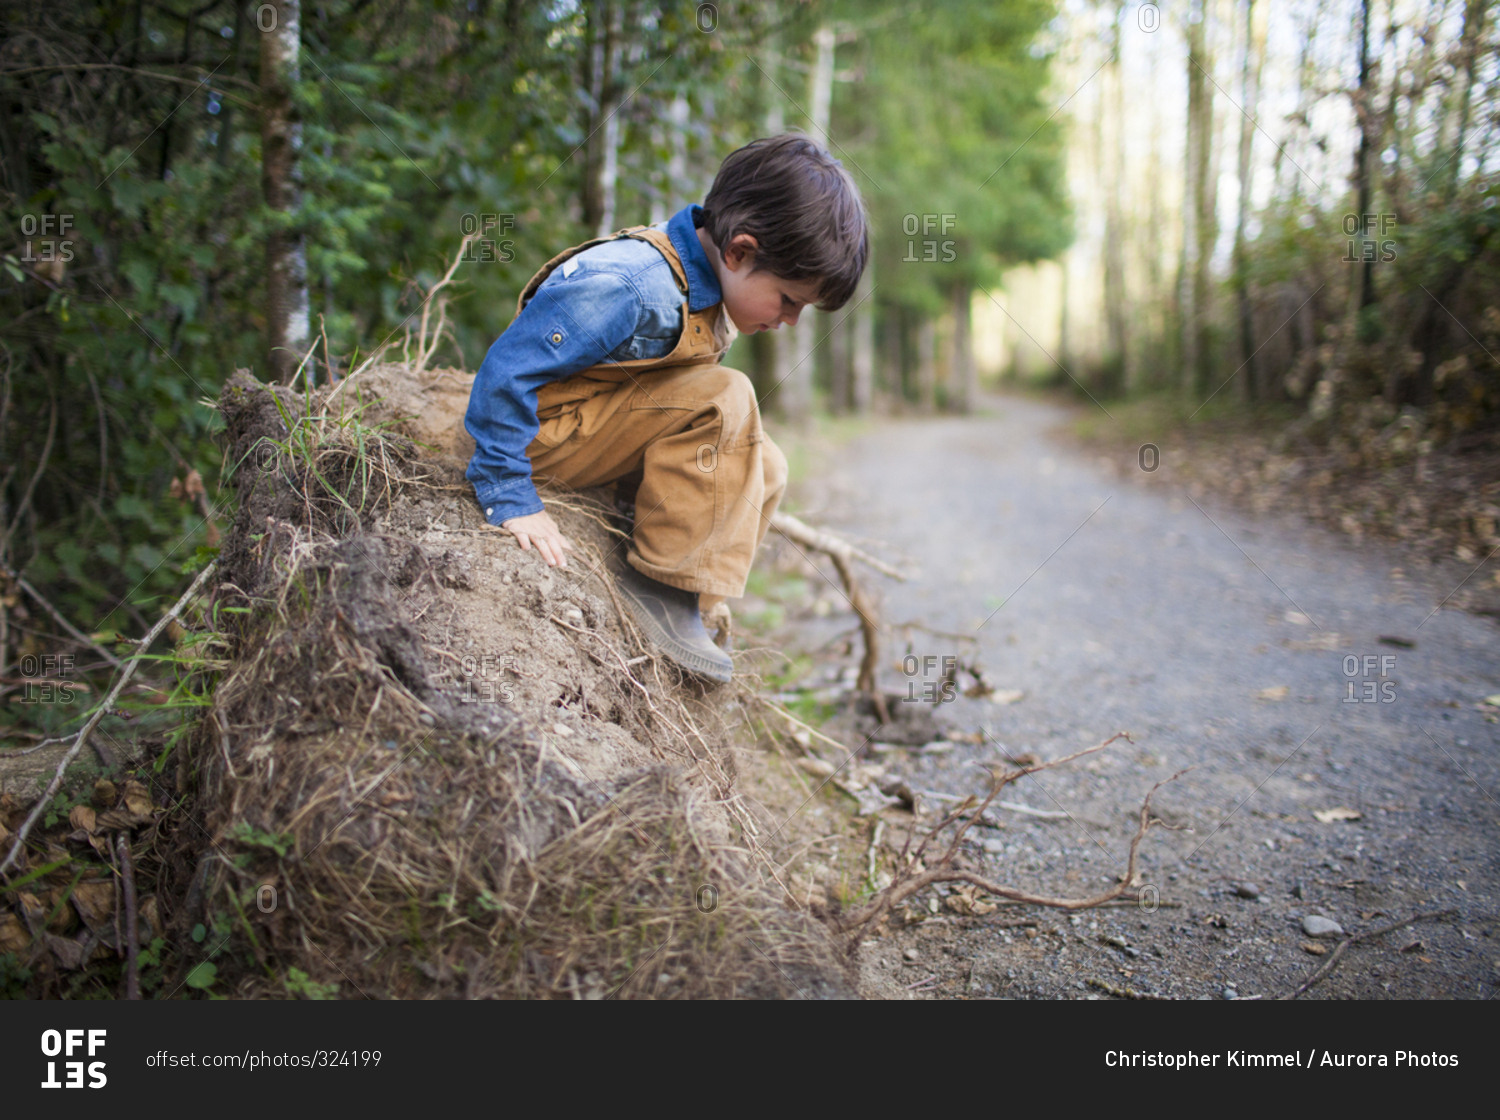 A young boy carefully plans to jump off a pile of dirt while playing outside